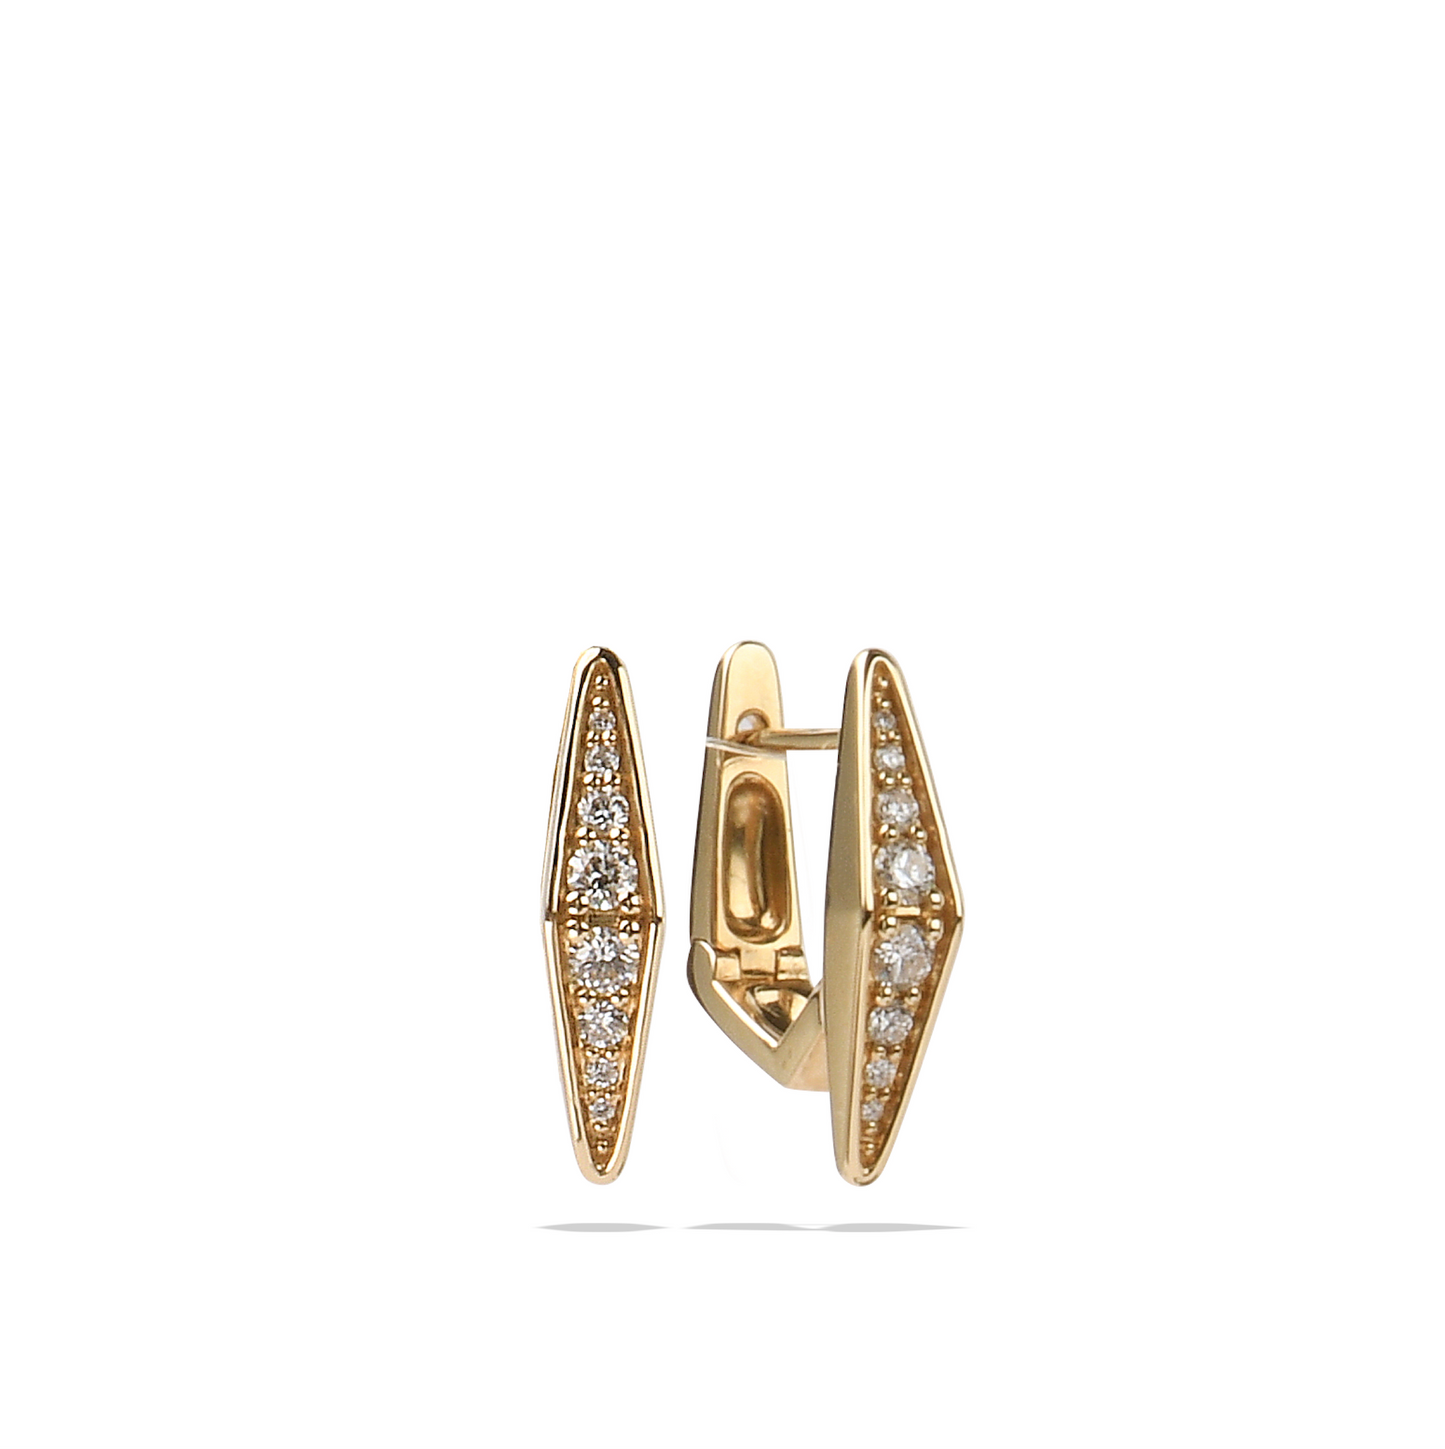 Solid Gold Natural White Diamond Single Earrings